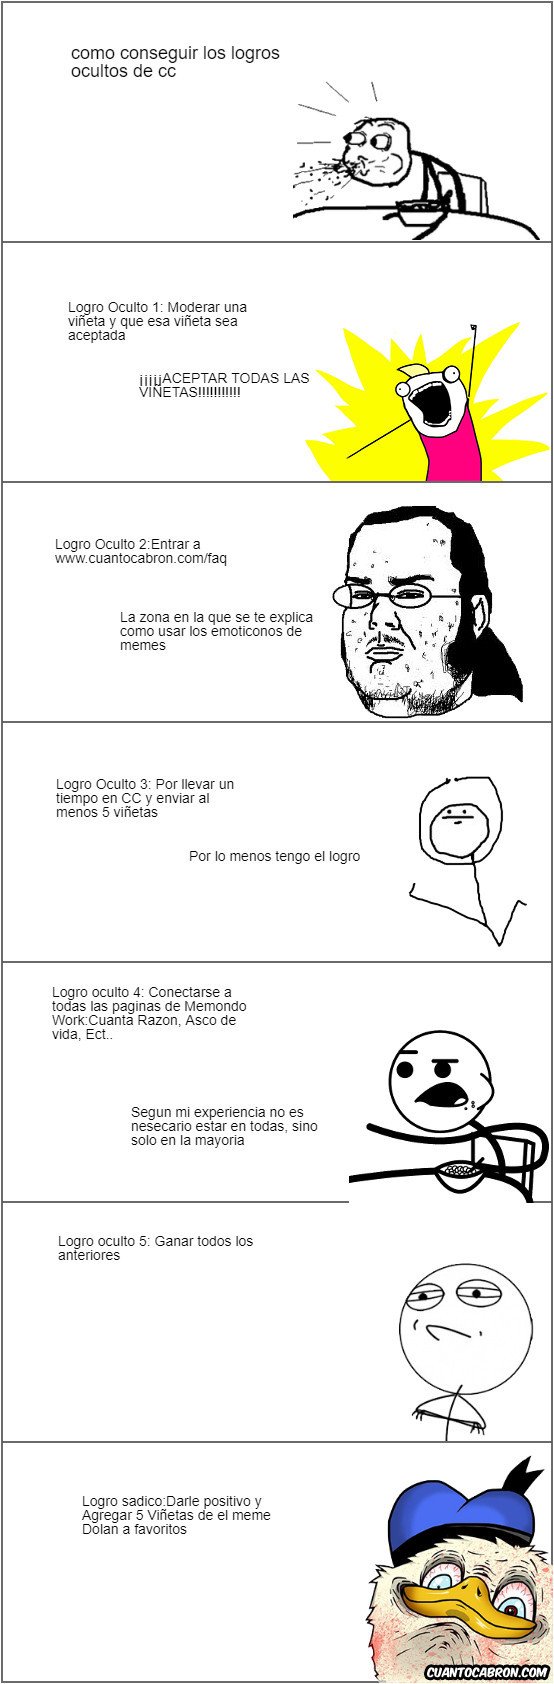 cereal guy,challenge acepted,cuantocabron,dolan,friki,logros,oculto,patata